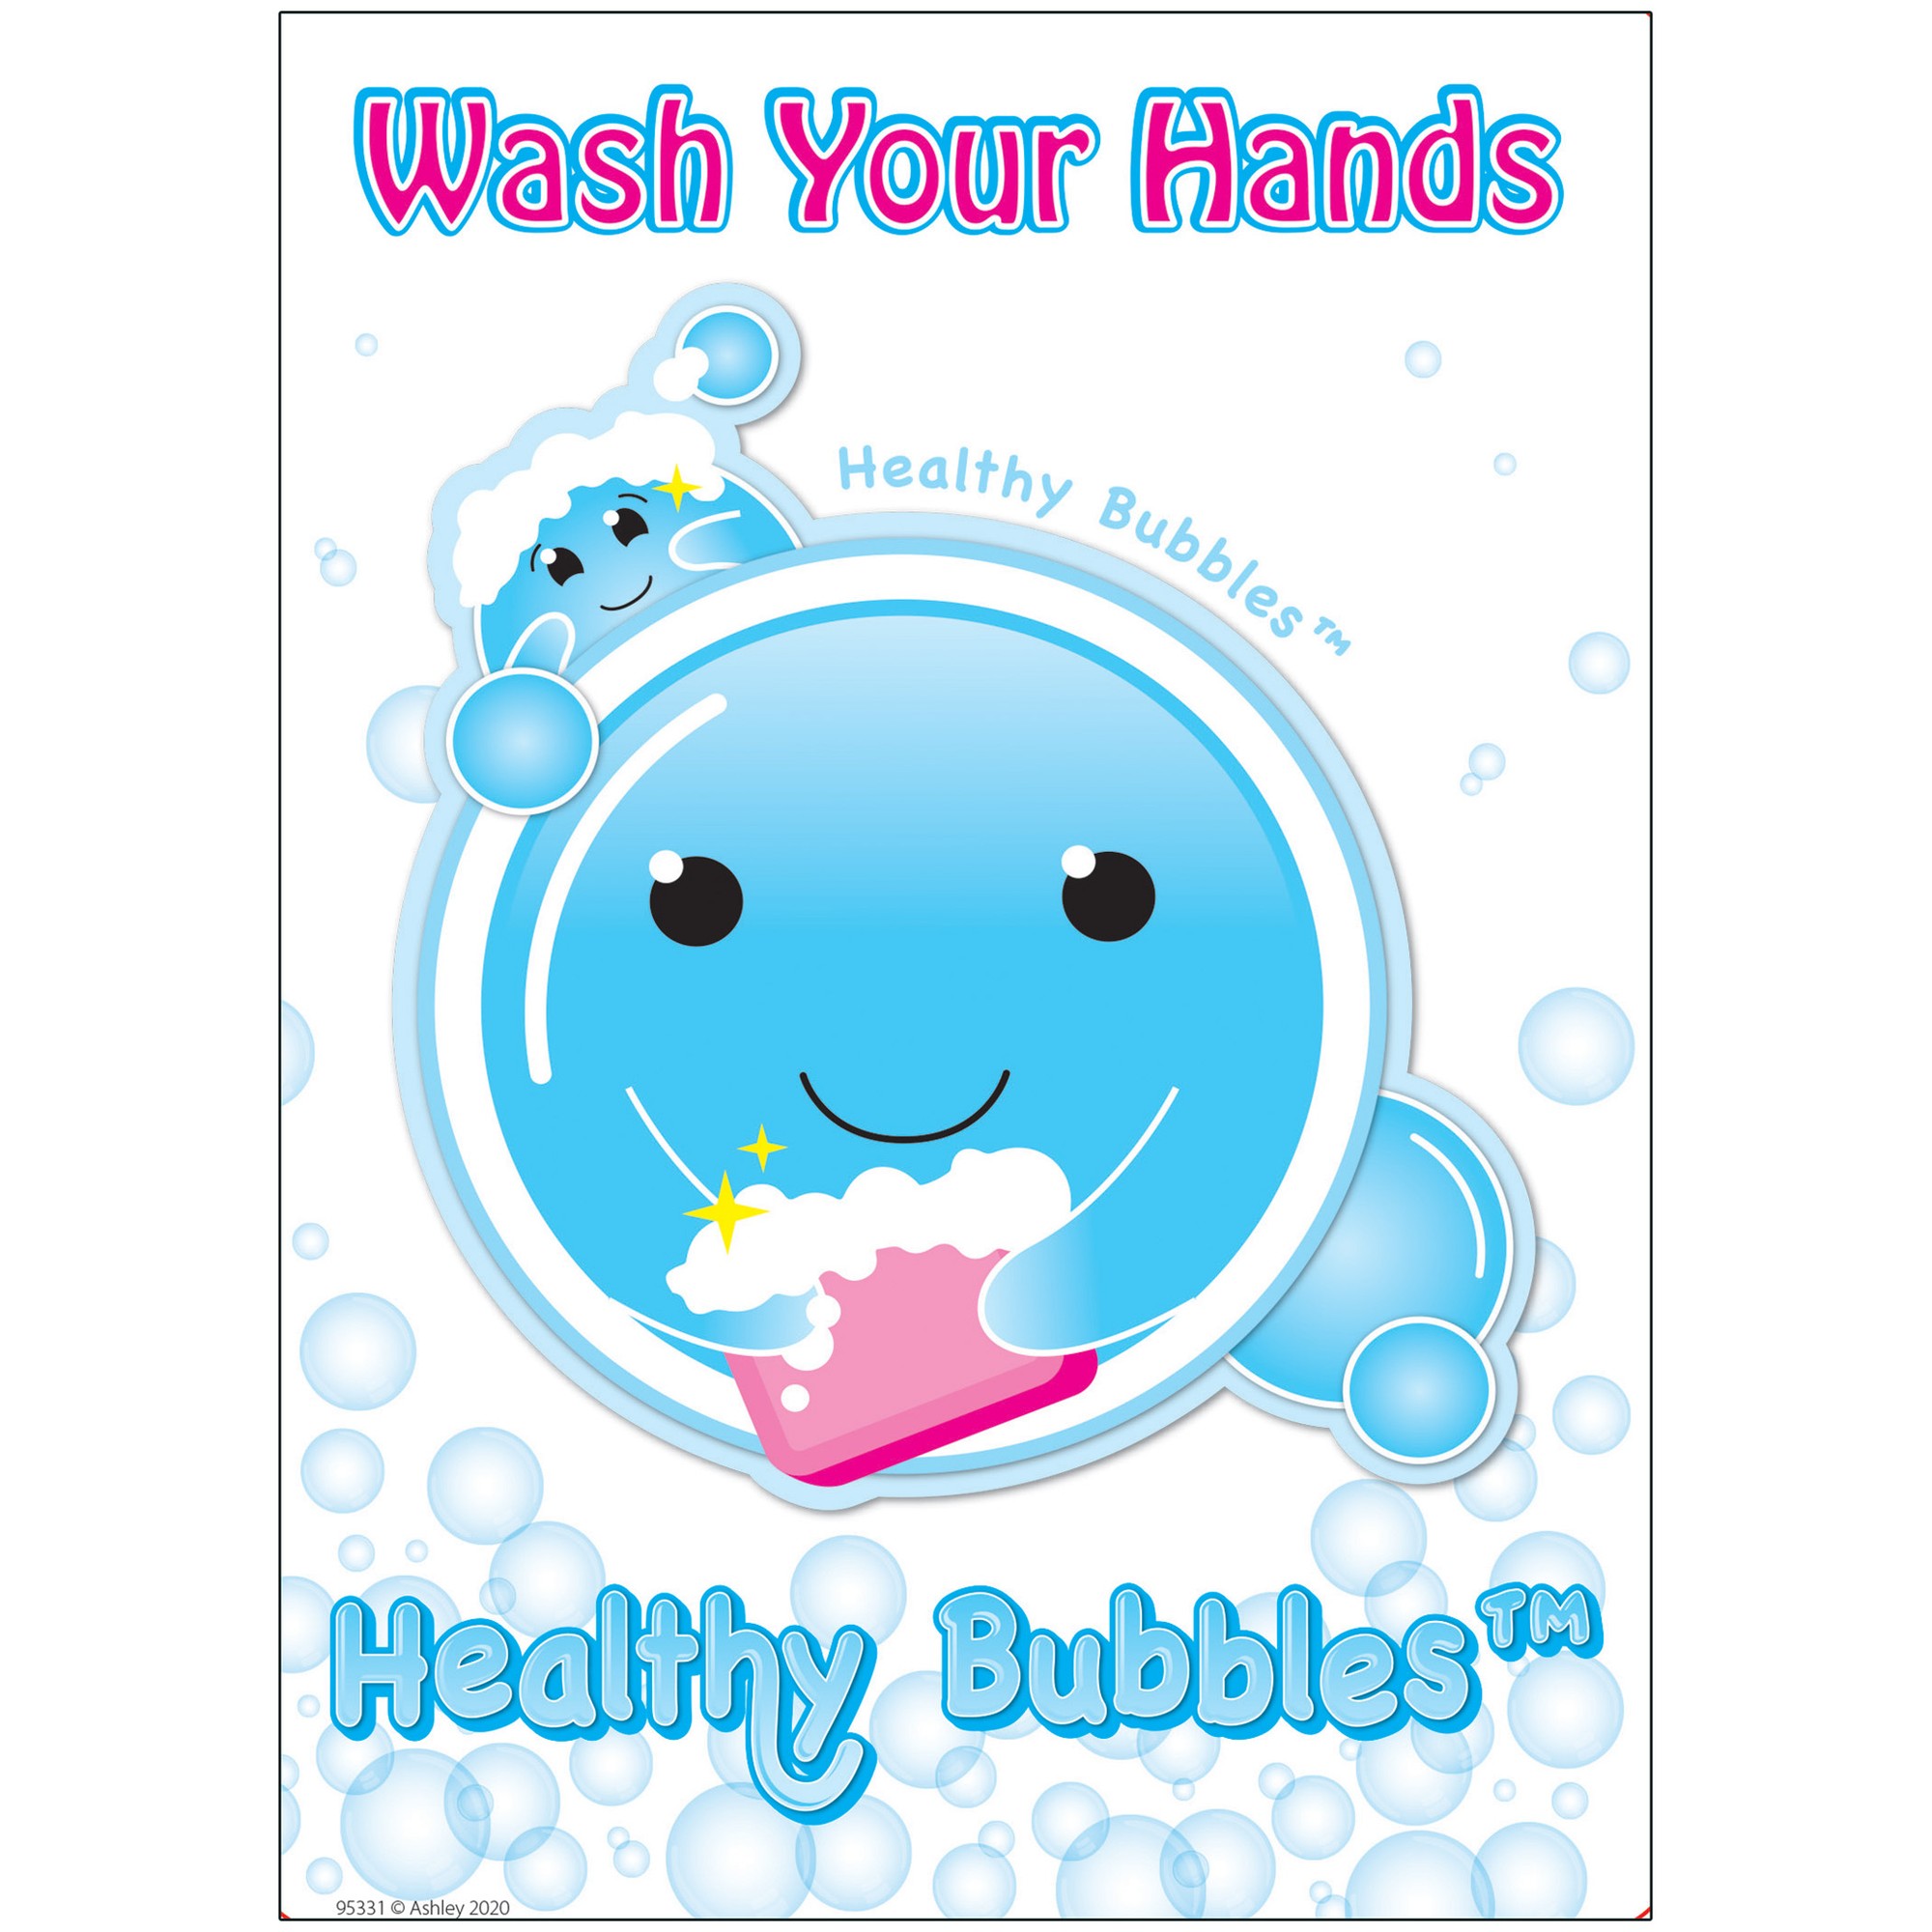 Healthy Bubbles PosterMat Pals Smart Poly Space Savers Cartoon Image Wash your Hands, 13" x 9.5"